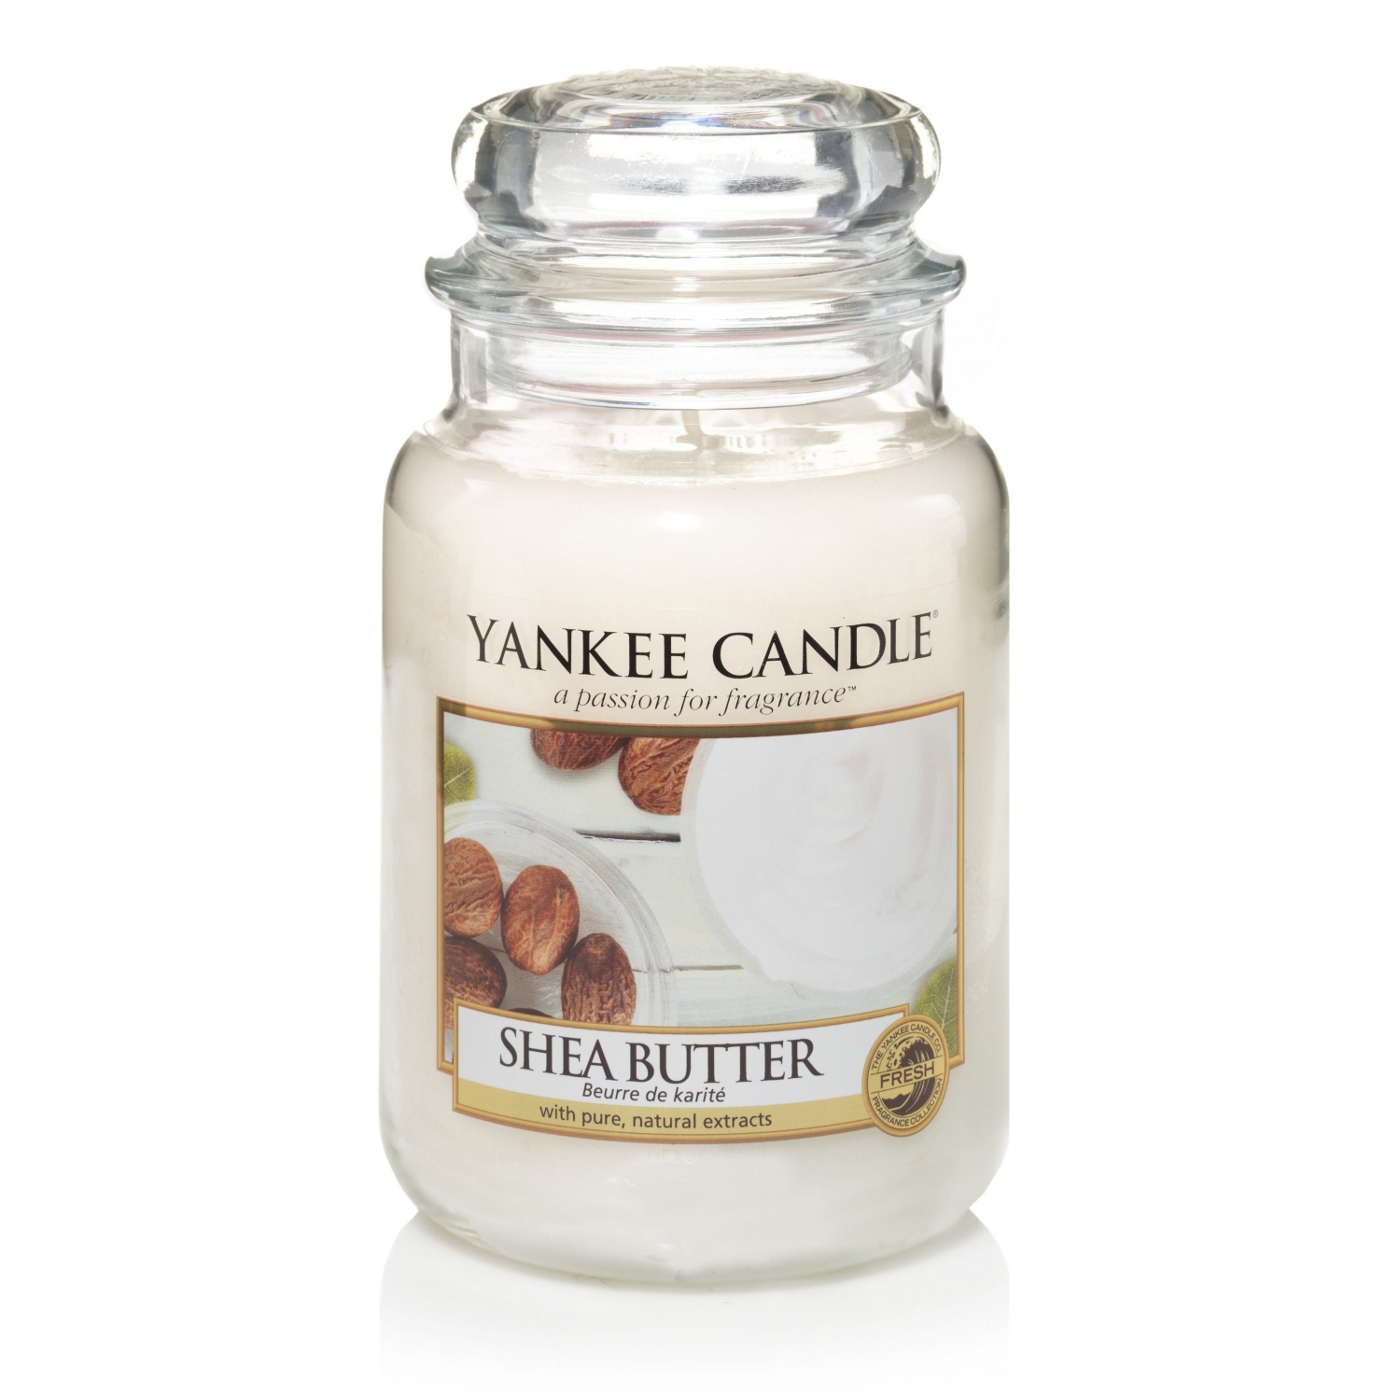 Yankee Candle Classic Shea Butter large jar candle